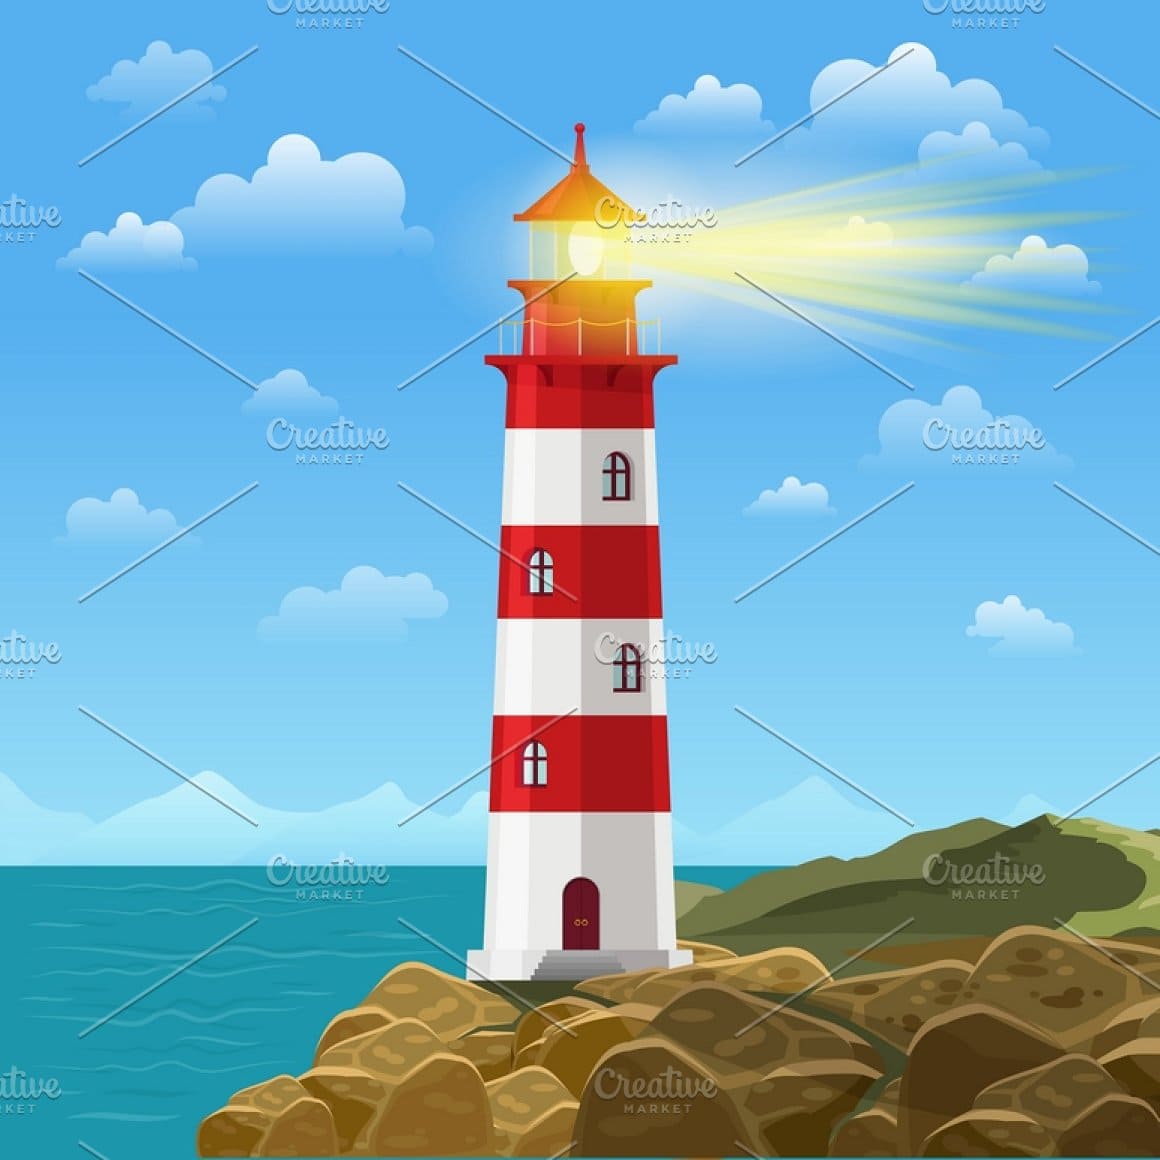 A tall red and white lighthouse shines brightly to ships on an island near the sea.